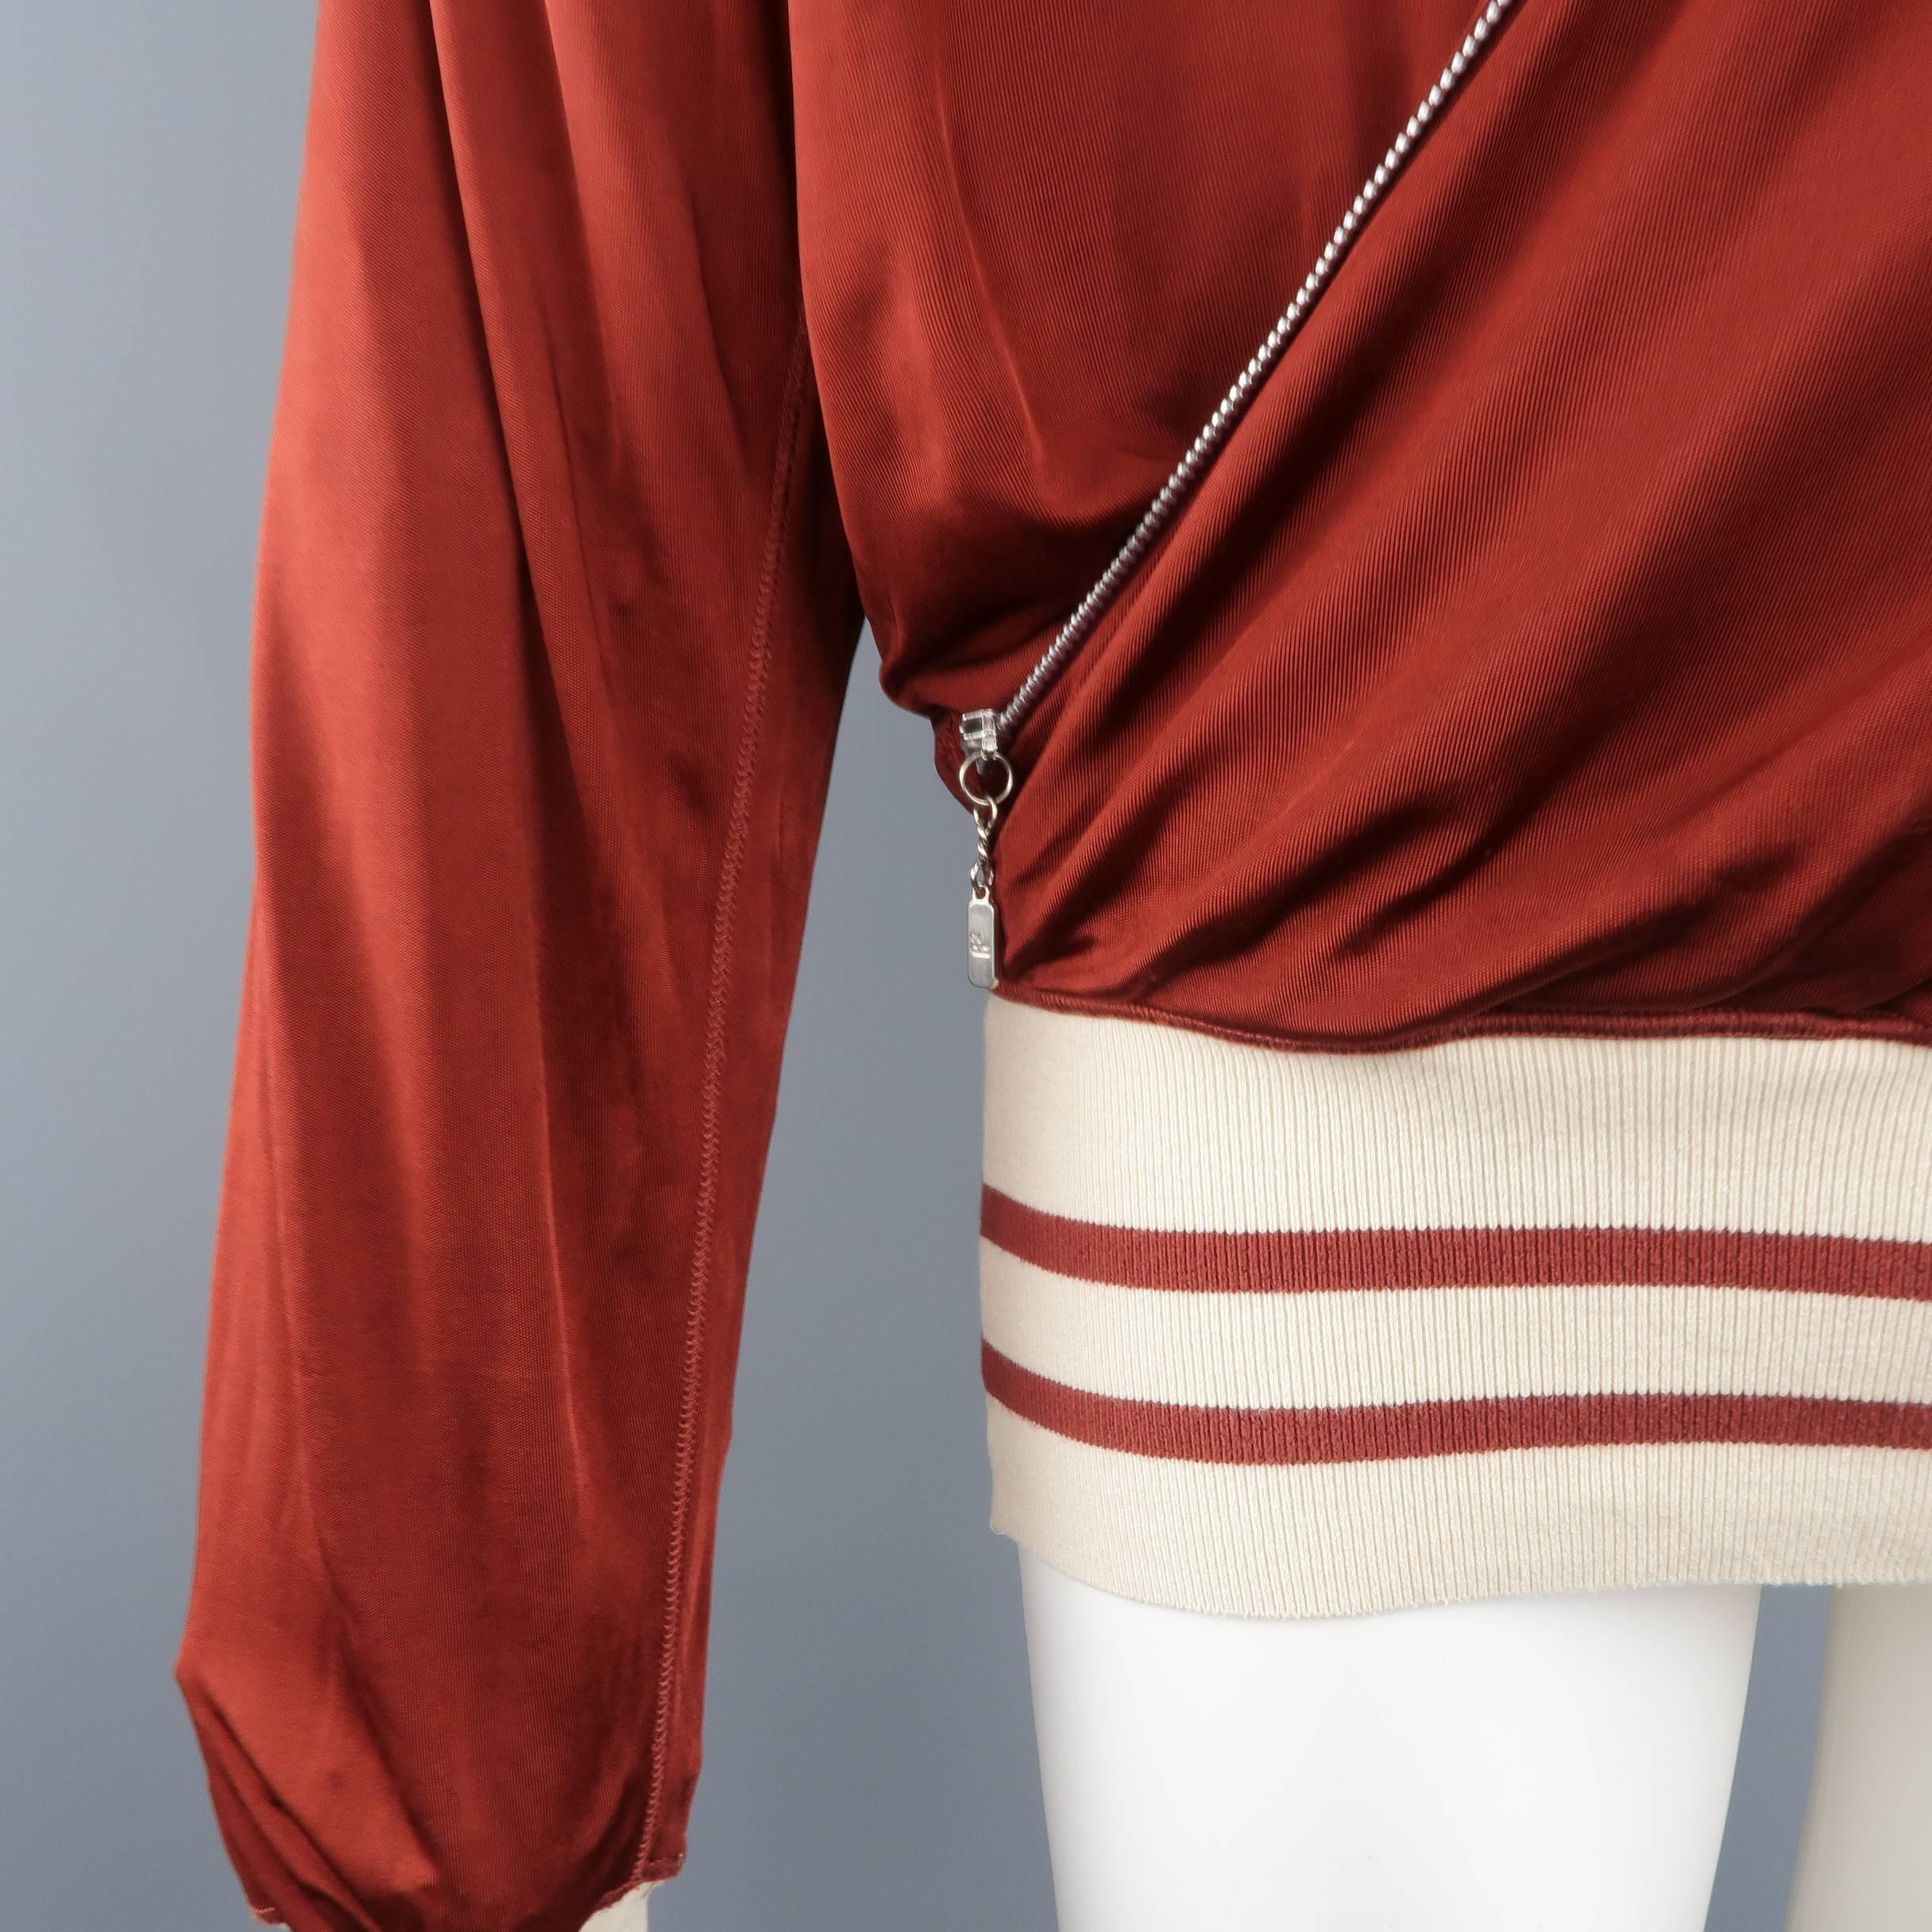 Vintage GAULTIER2 by JEAN PAUL GAULTIER pullover jacket comes in a silky rayon knit and features a wrap draped front with zipper trim, beige and burgundy striped knit bands, drawstring hood, and signature back tab. Minor wear. Made in Italy.
 
Good